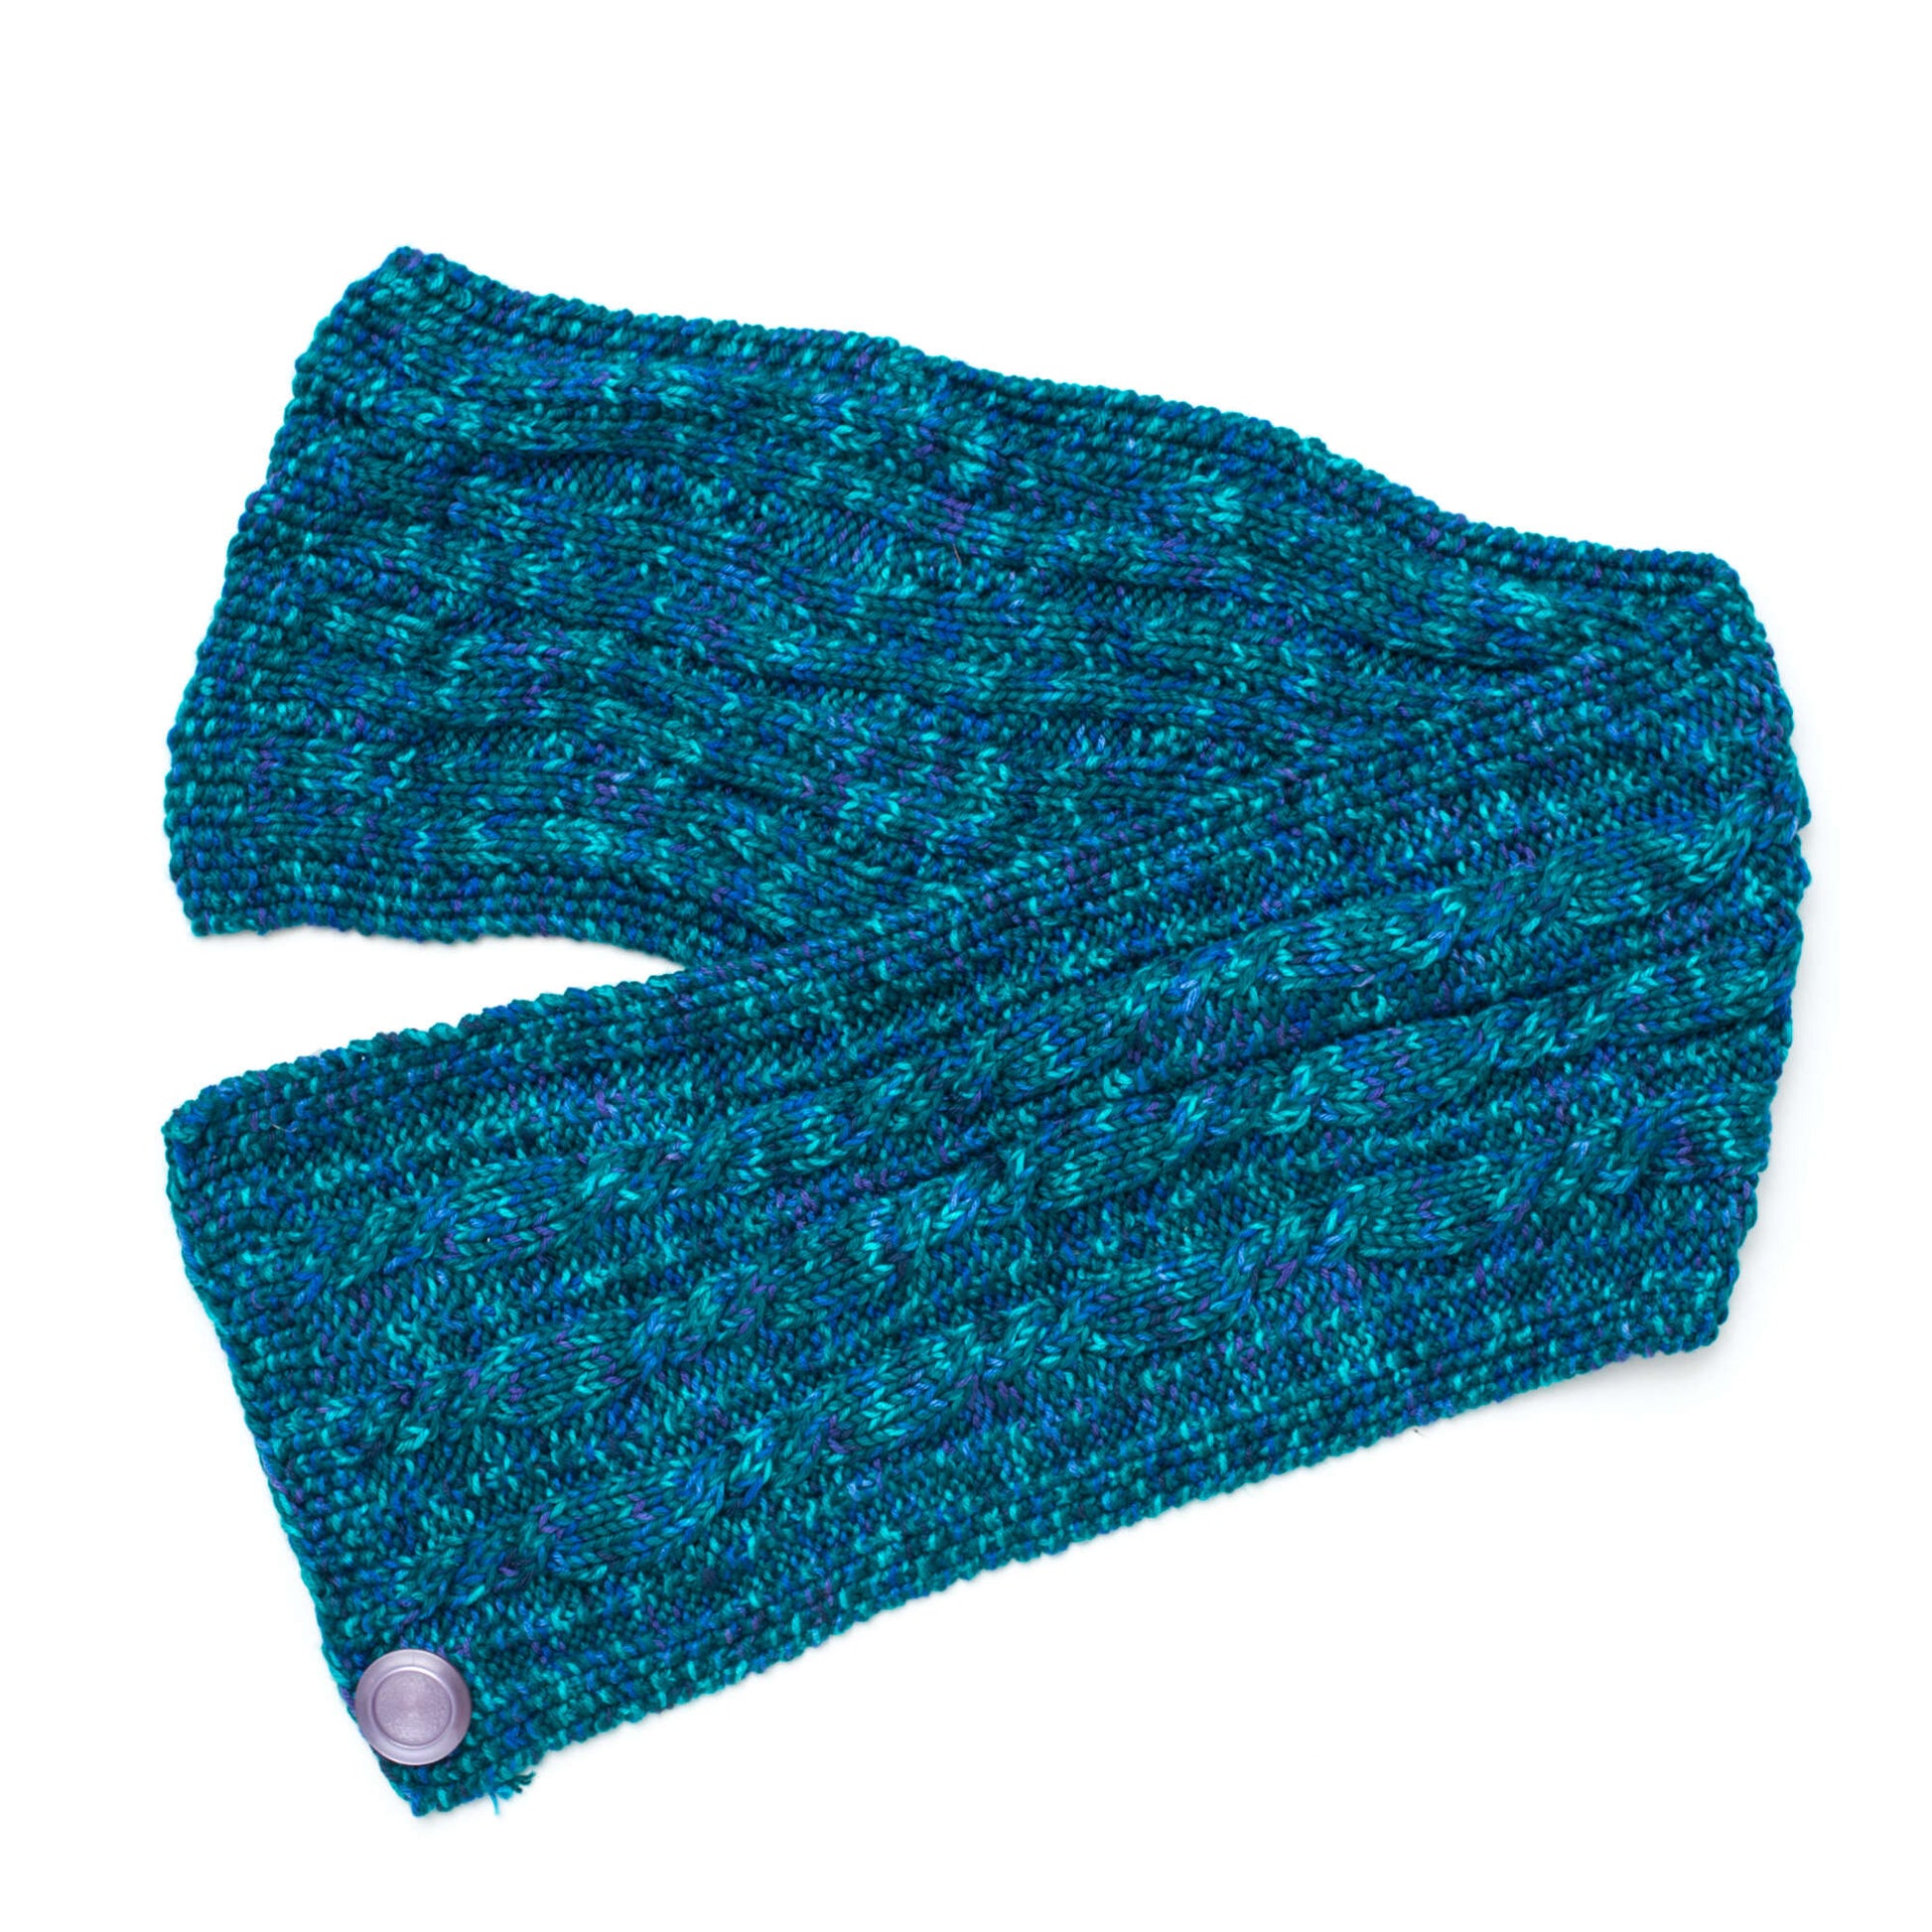 Free Caron Knit Oceanic Cables Wrap Pattern